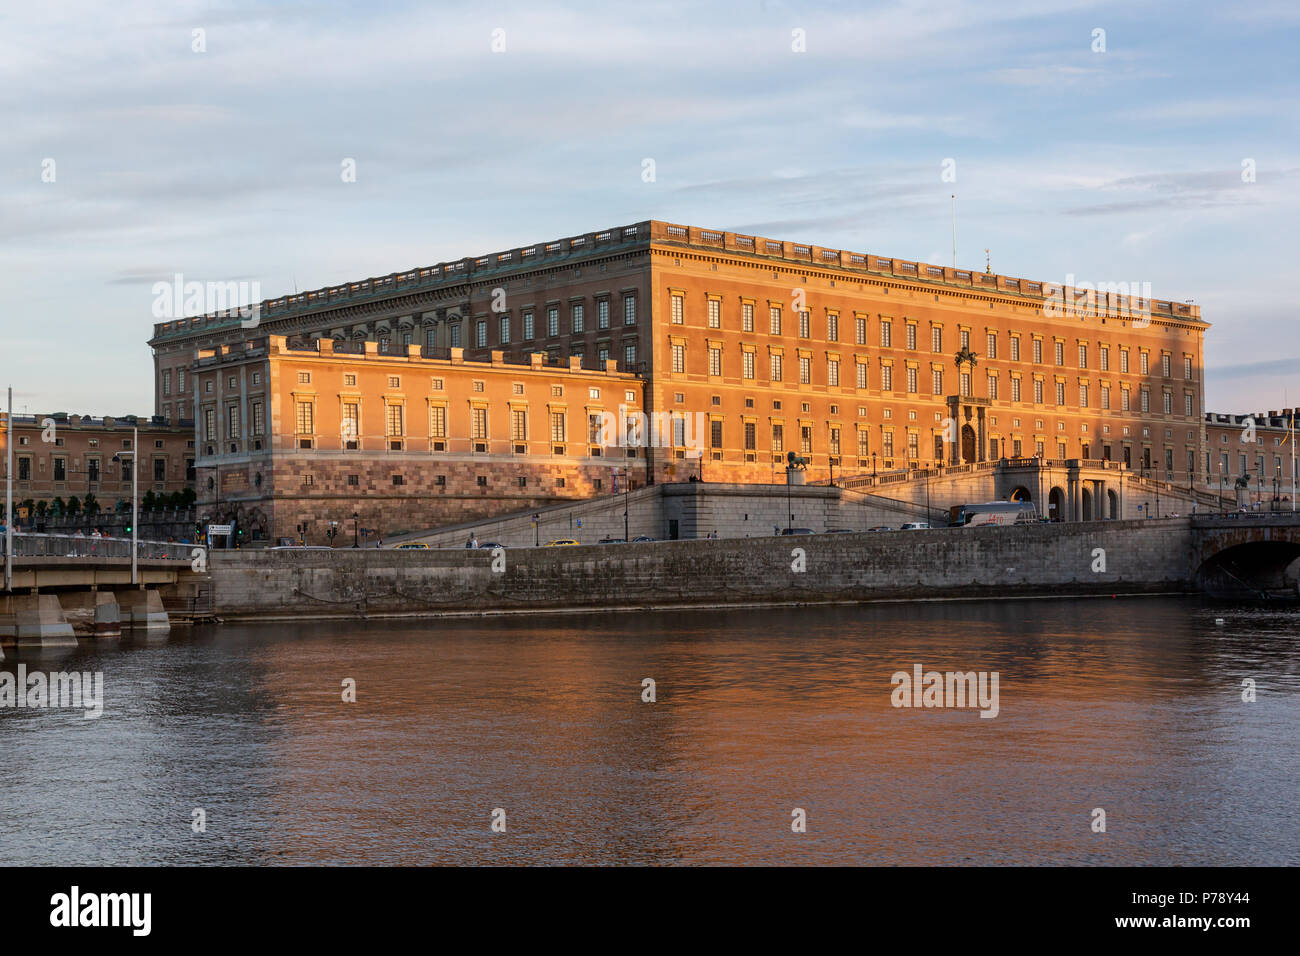 The Royal Palace, Gamla Stan, Stockholm, Sweden Stock Photo